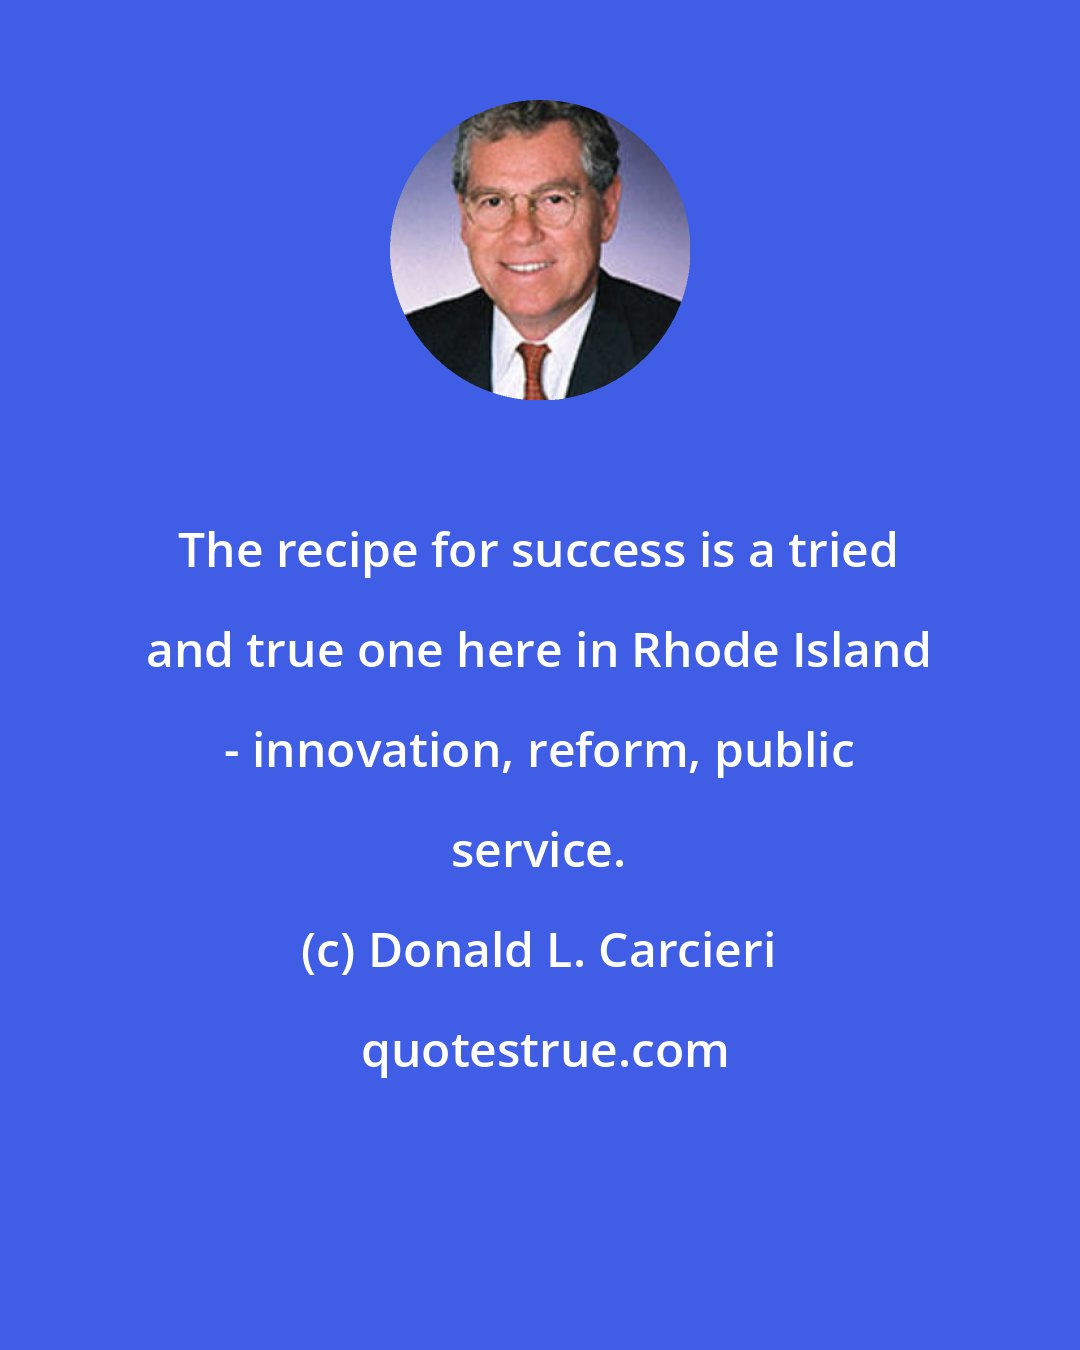 Donald L. Carcieri: The recipe for success is a tried and true one here in Rhode Island - innovation, reform, public service.